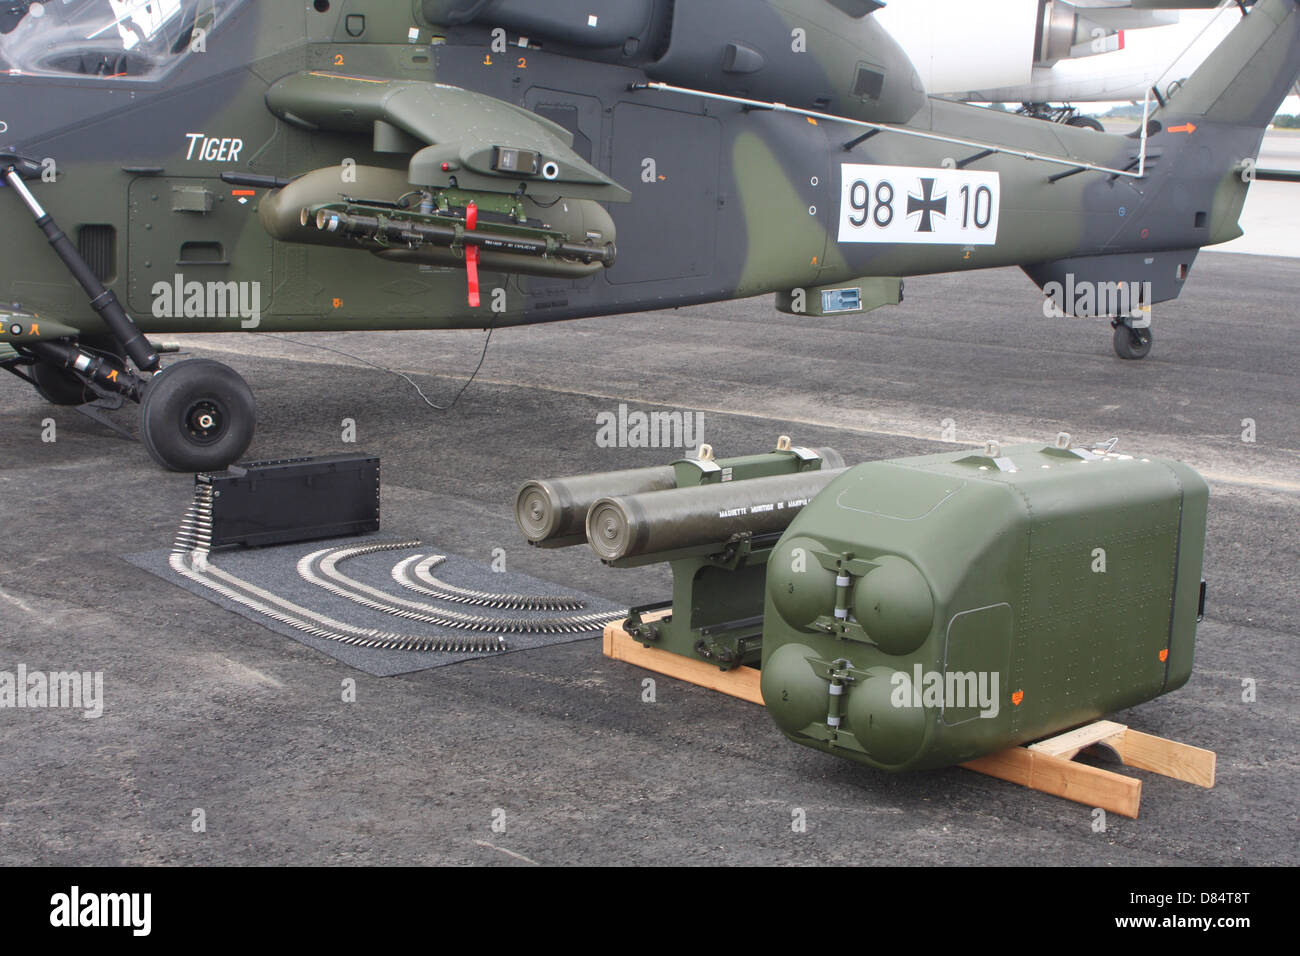 German Army Tiger helicopter and its weaponry, Schoenefeld Airport, Germany. Stock Photo